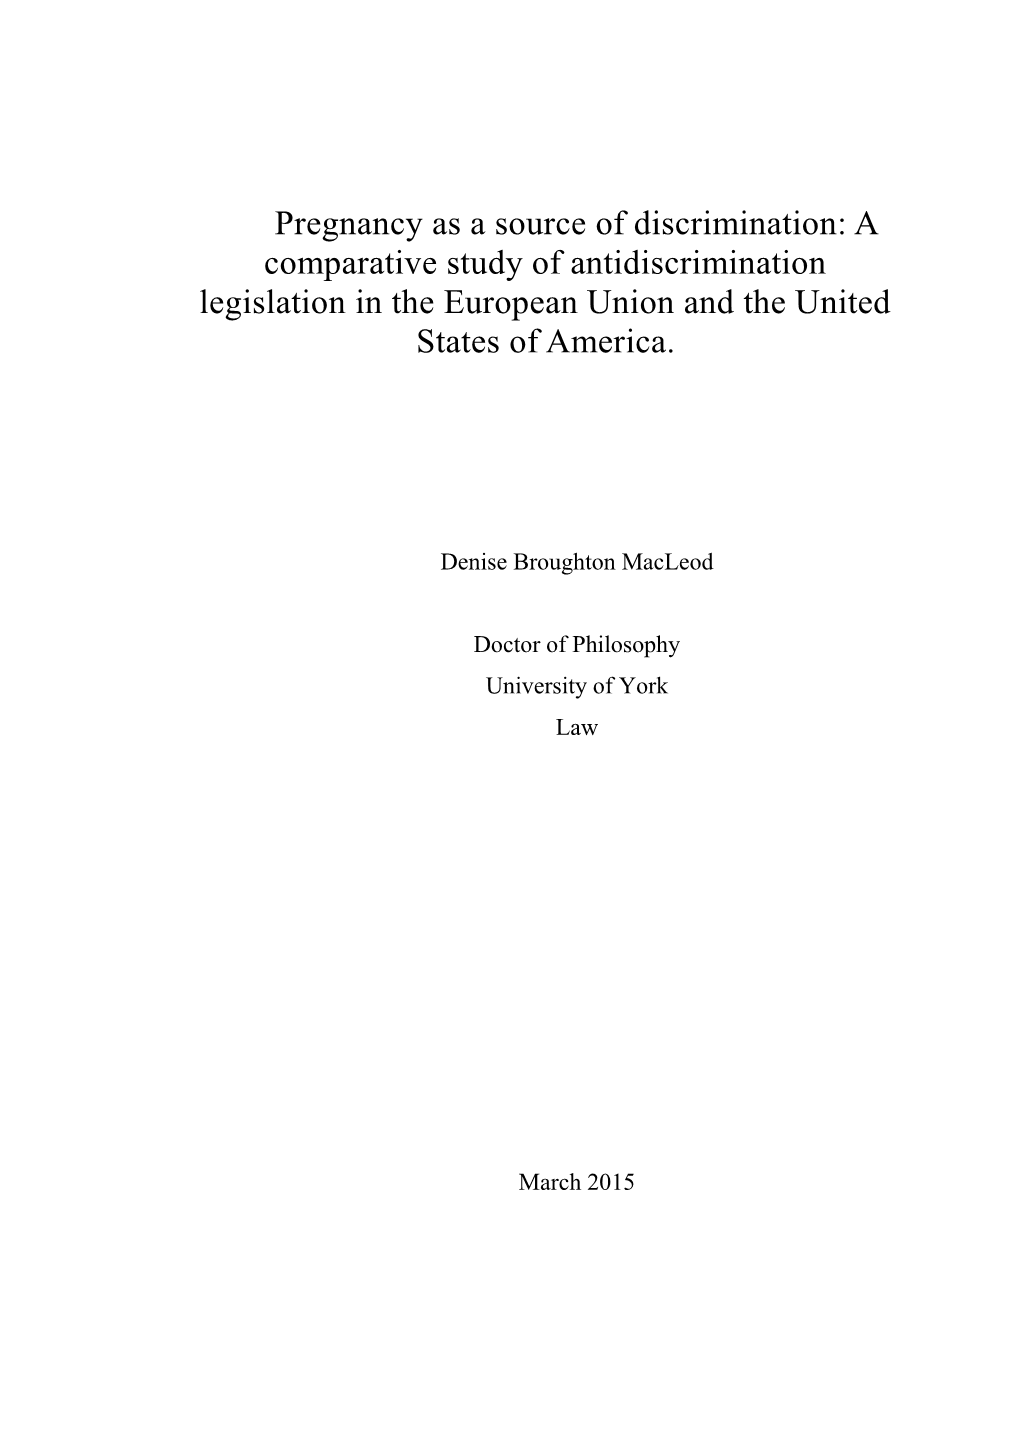 Pregnancy As a Source of Discrimination: a Comparative Study of Antidiscrimination Legislation in the European Union and the United States of America